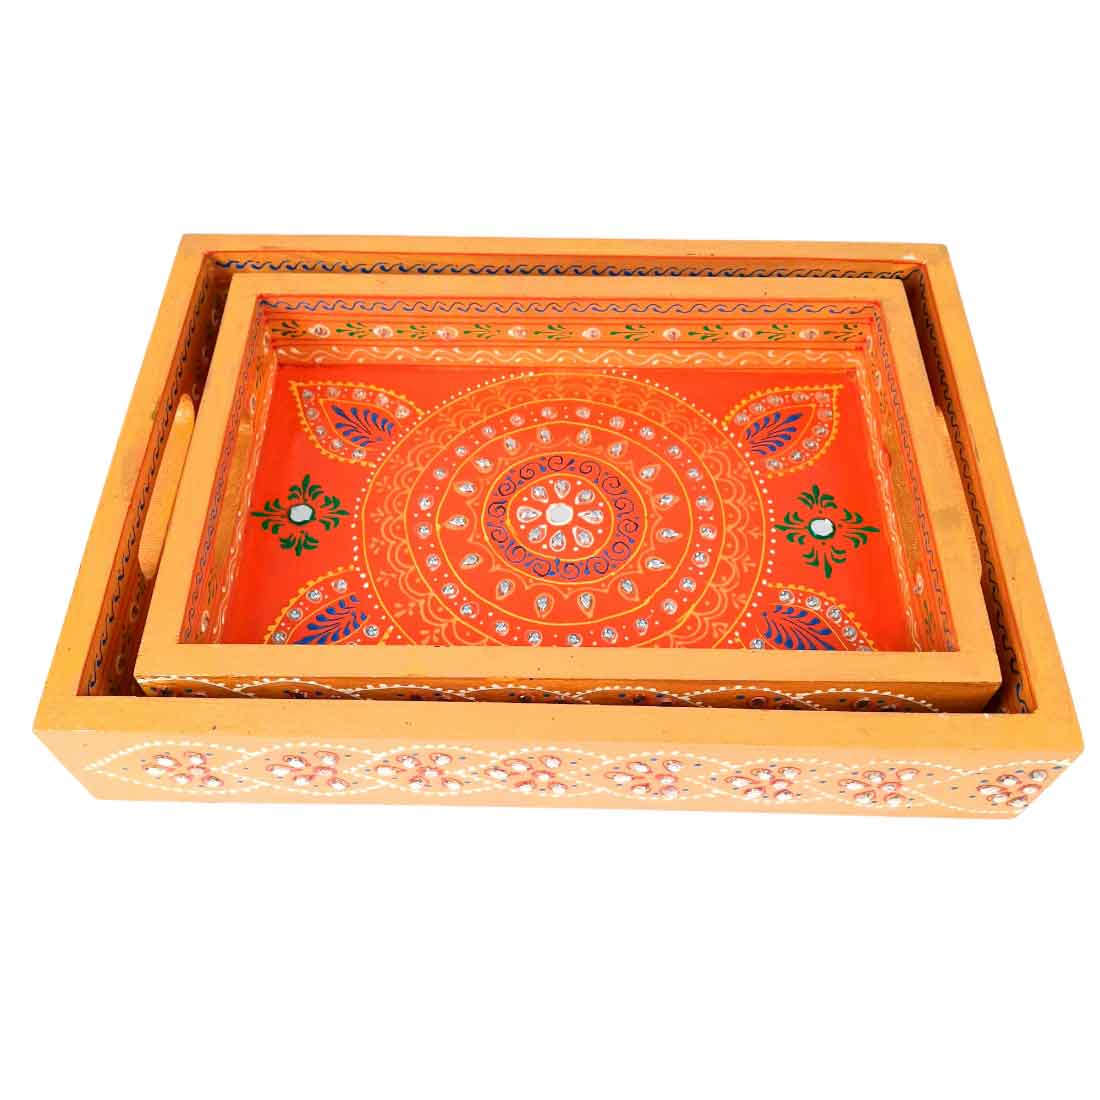 Tray Wooden | Tea & Snacks Serving Platter | Decorative Handcrafted Trays - for Home, Dining Table, Kitchen Decor | Wedding & Housewarming Gift - 14 Inch